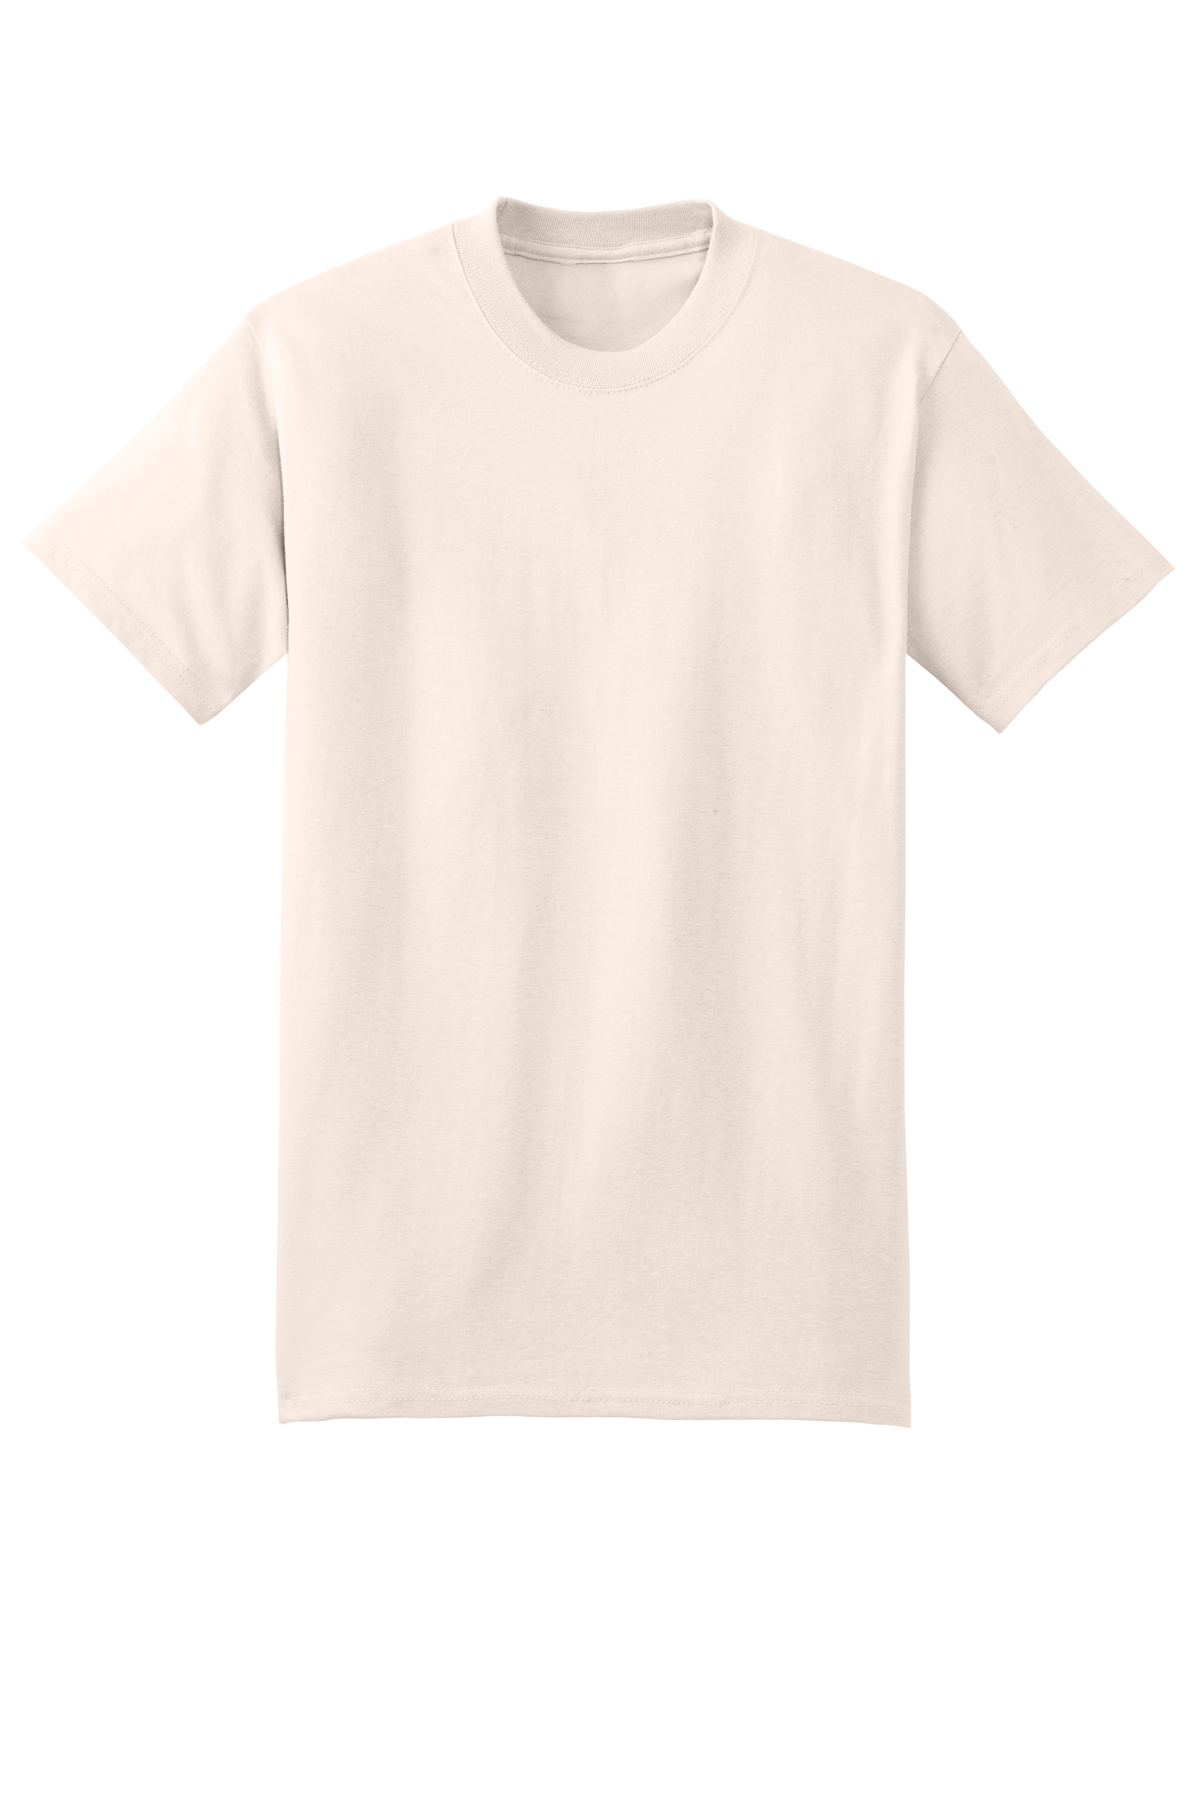 Hanes Beefy-T - 100% Cotton T-Shirt, Product